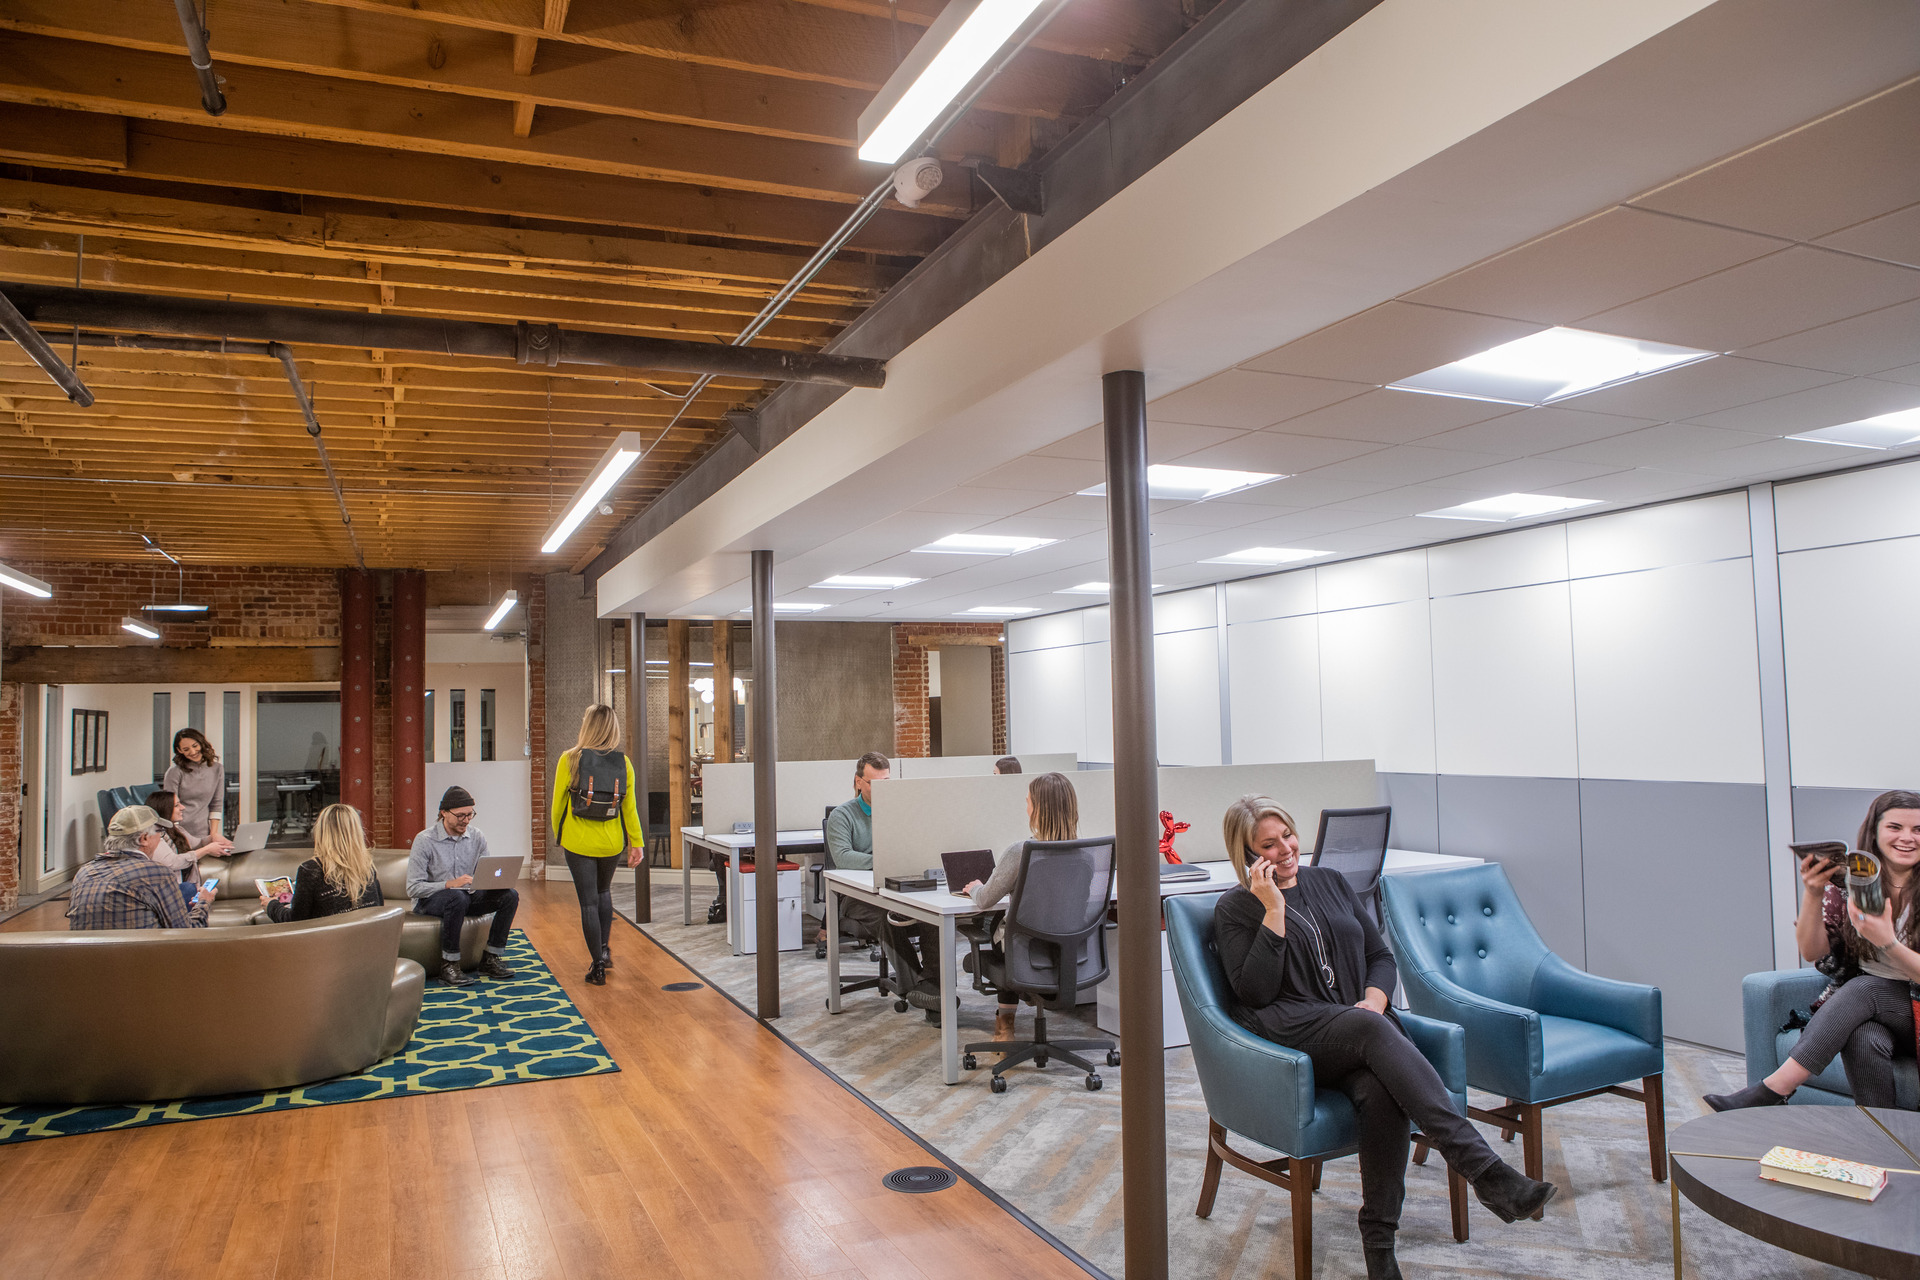 , The Benefits of Coworking Spaces and What Makes a Good Coworking Space